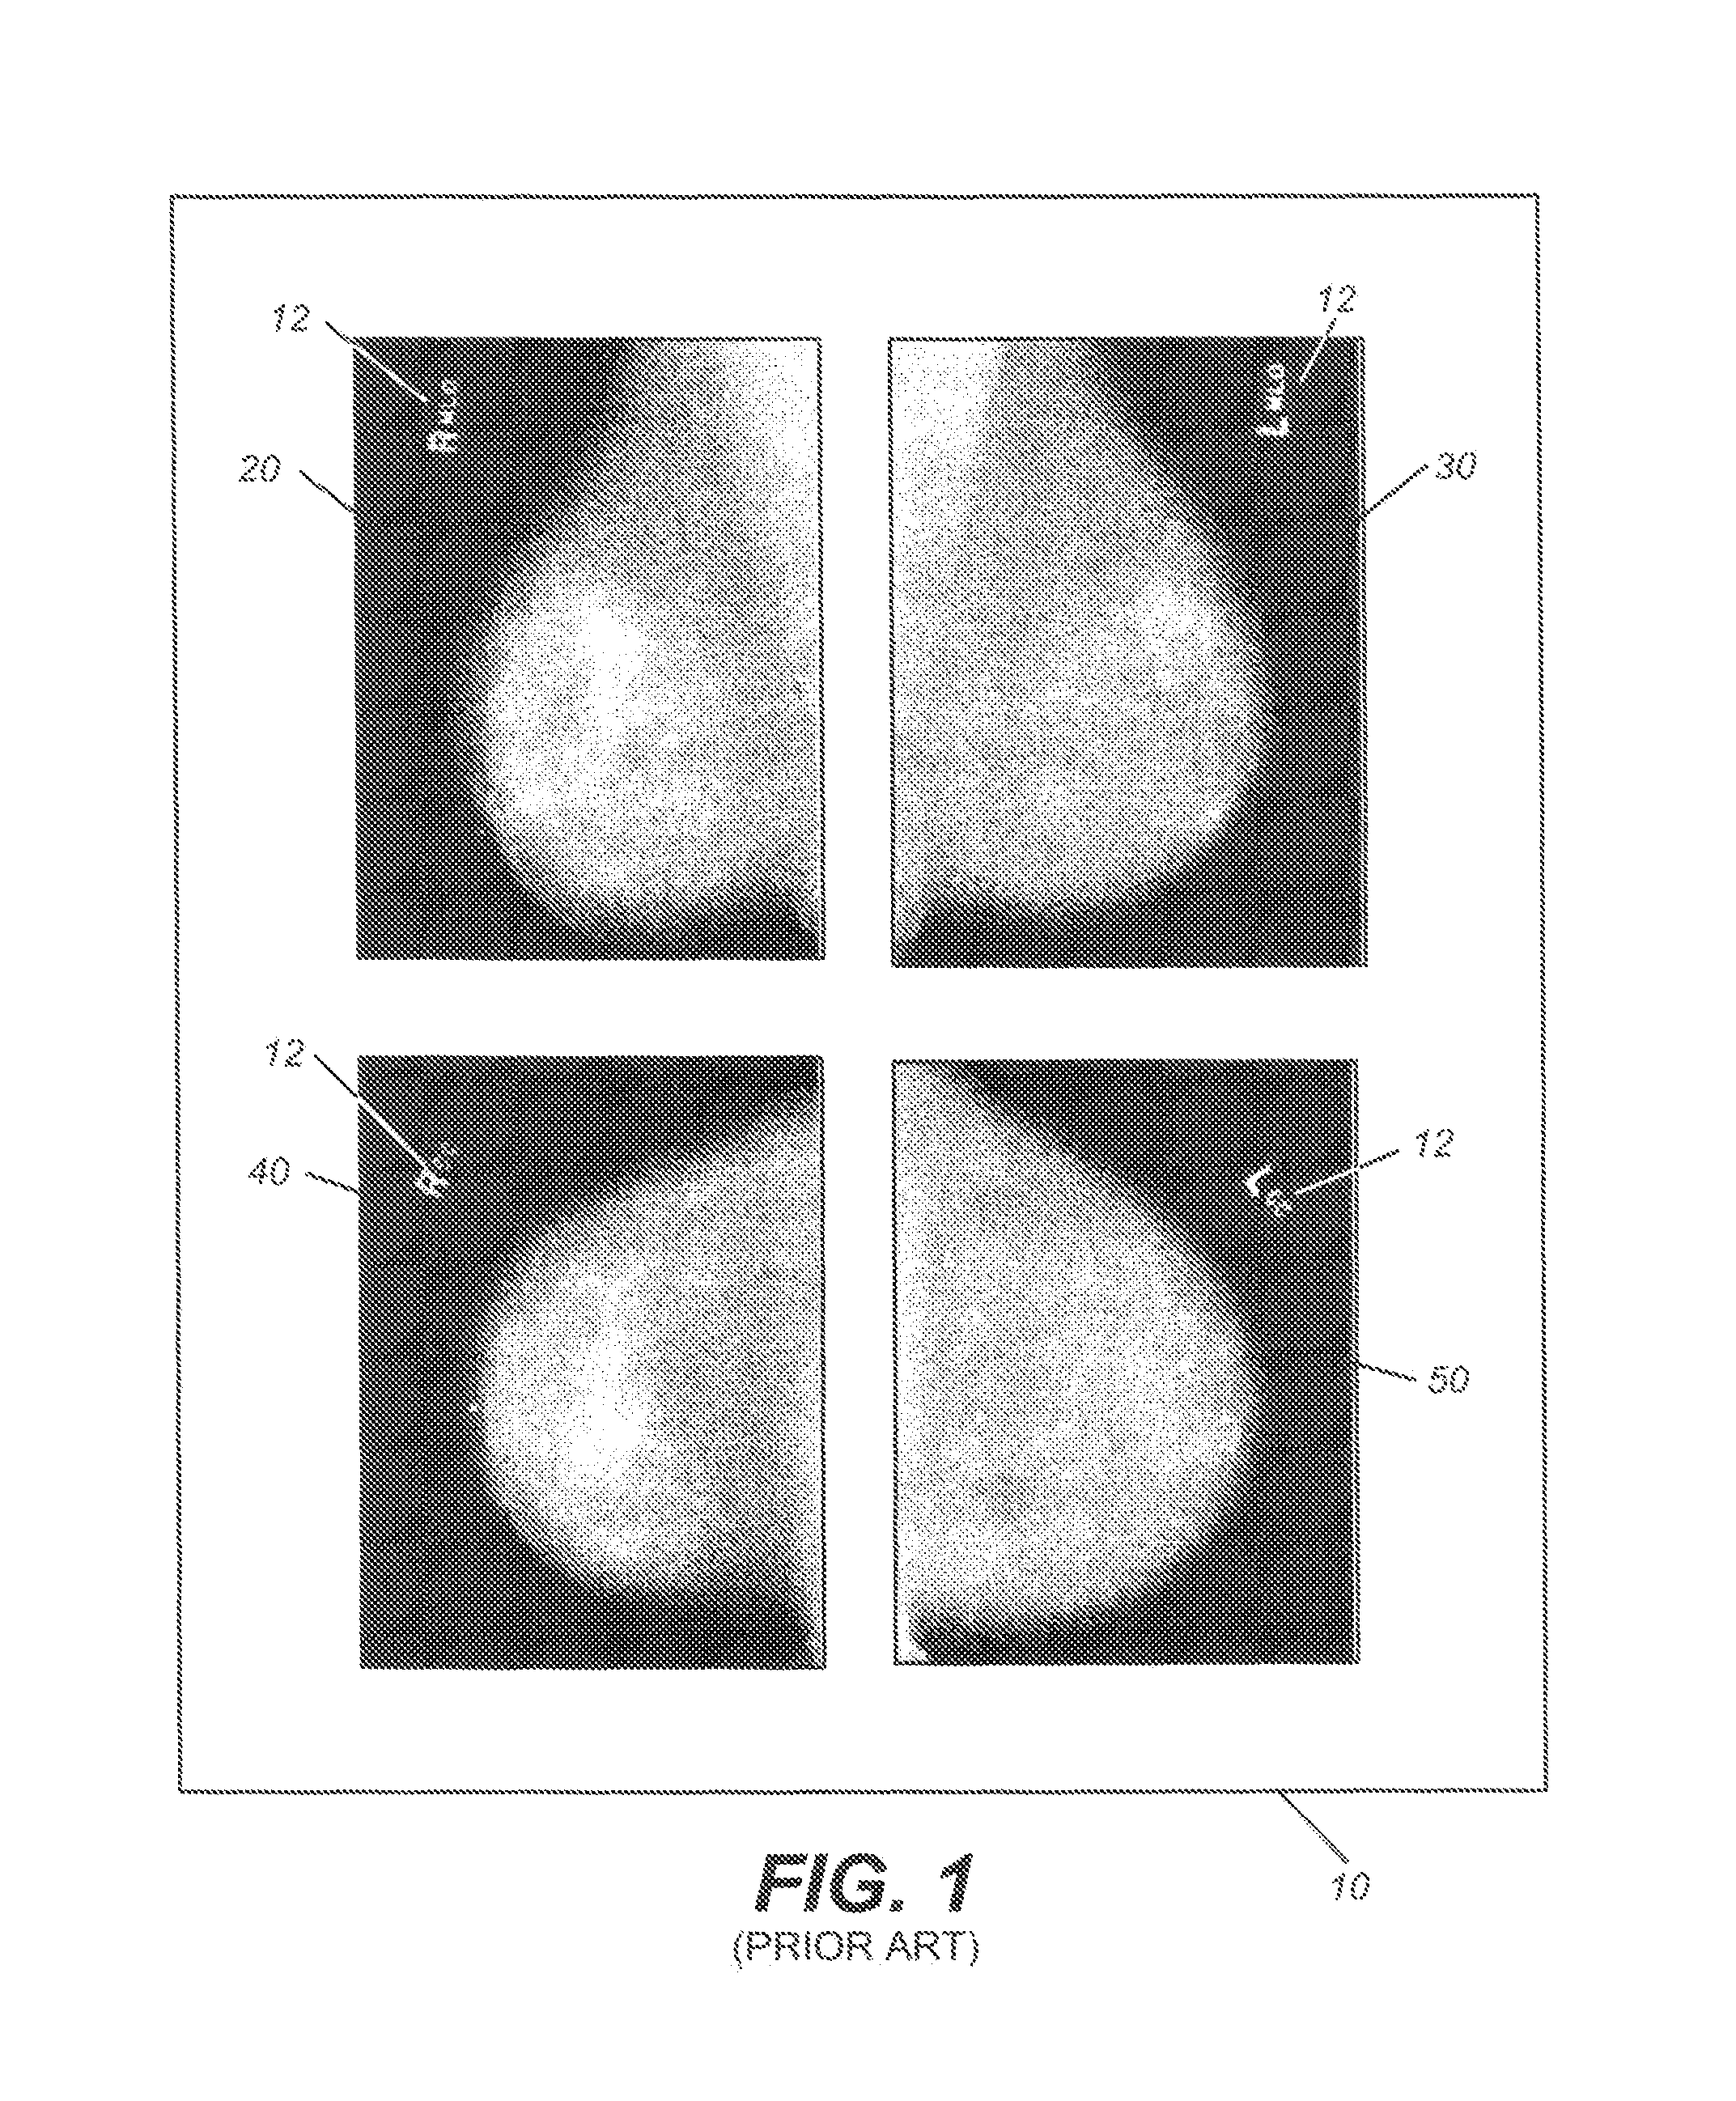 Method for classifying breast tissue density using computed image features